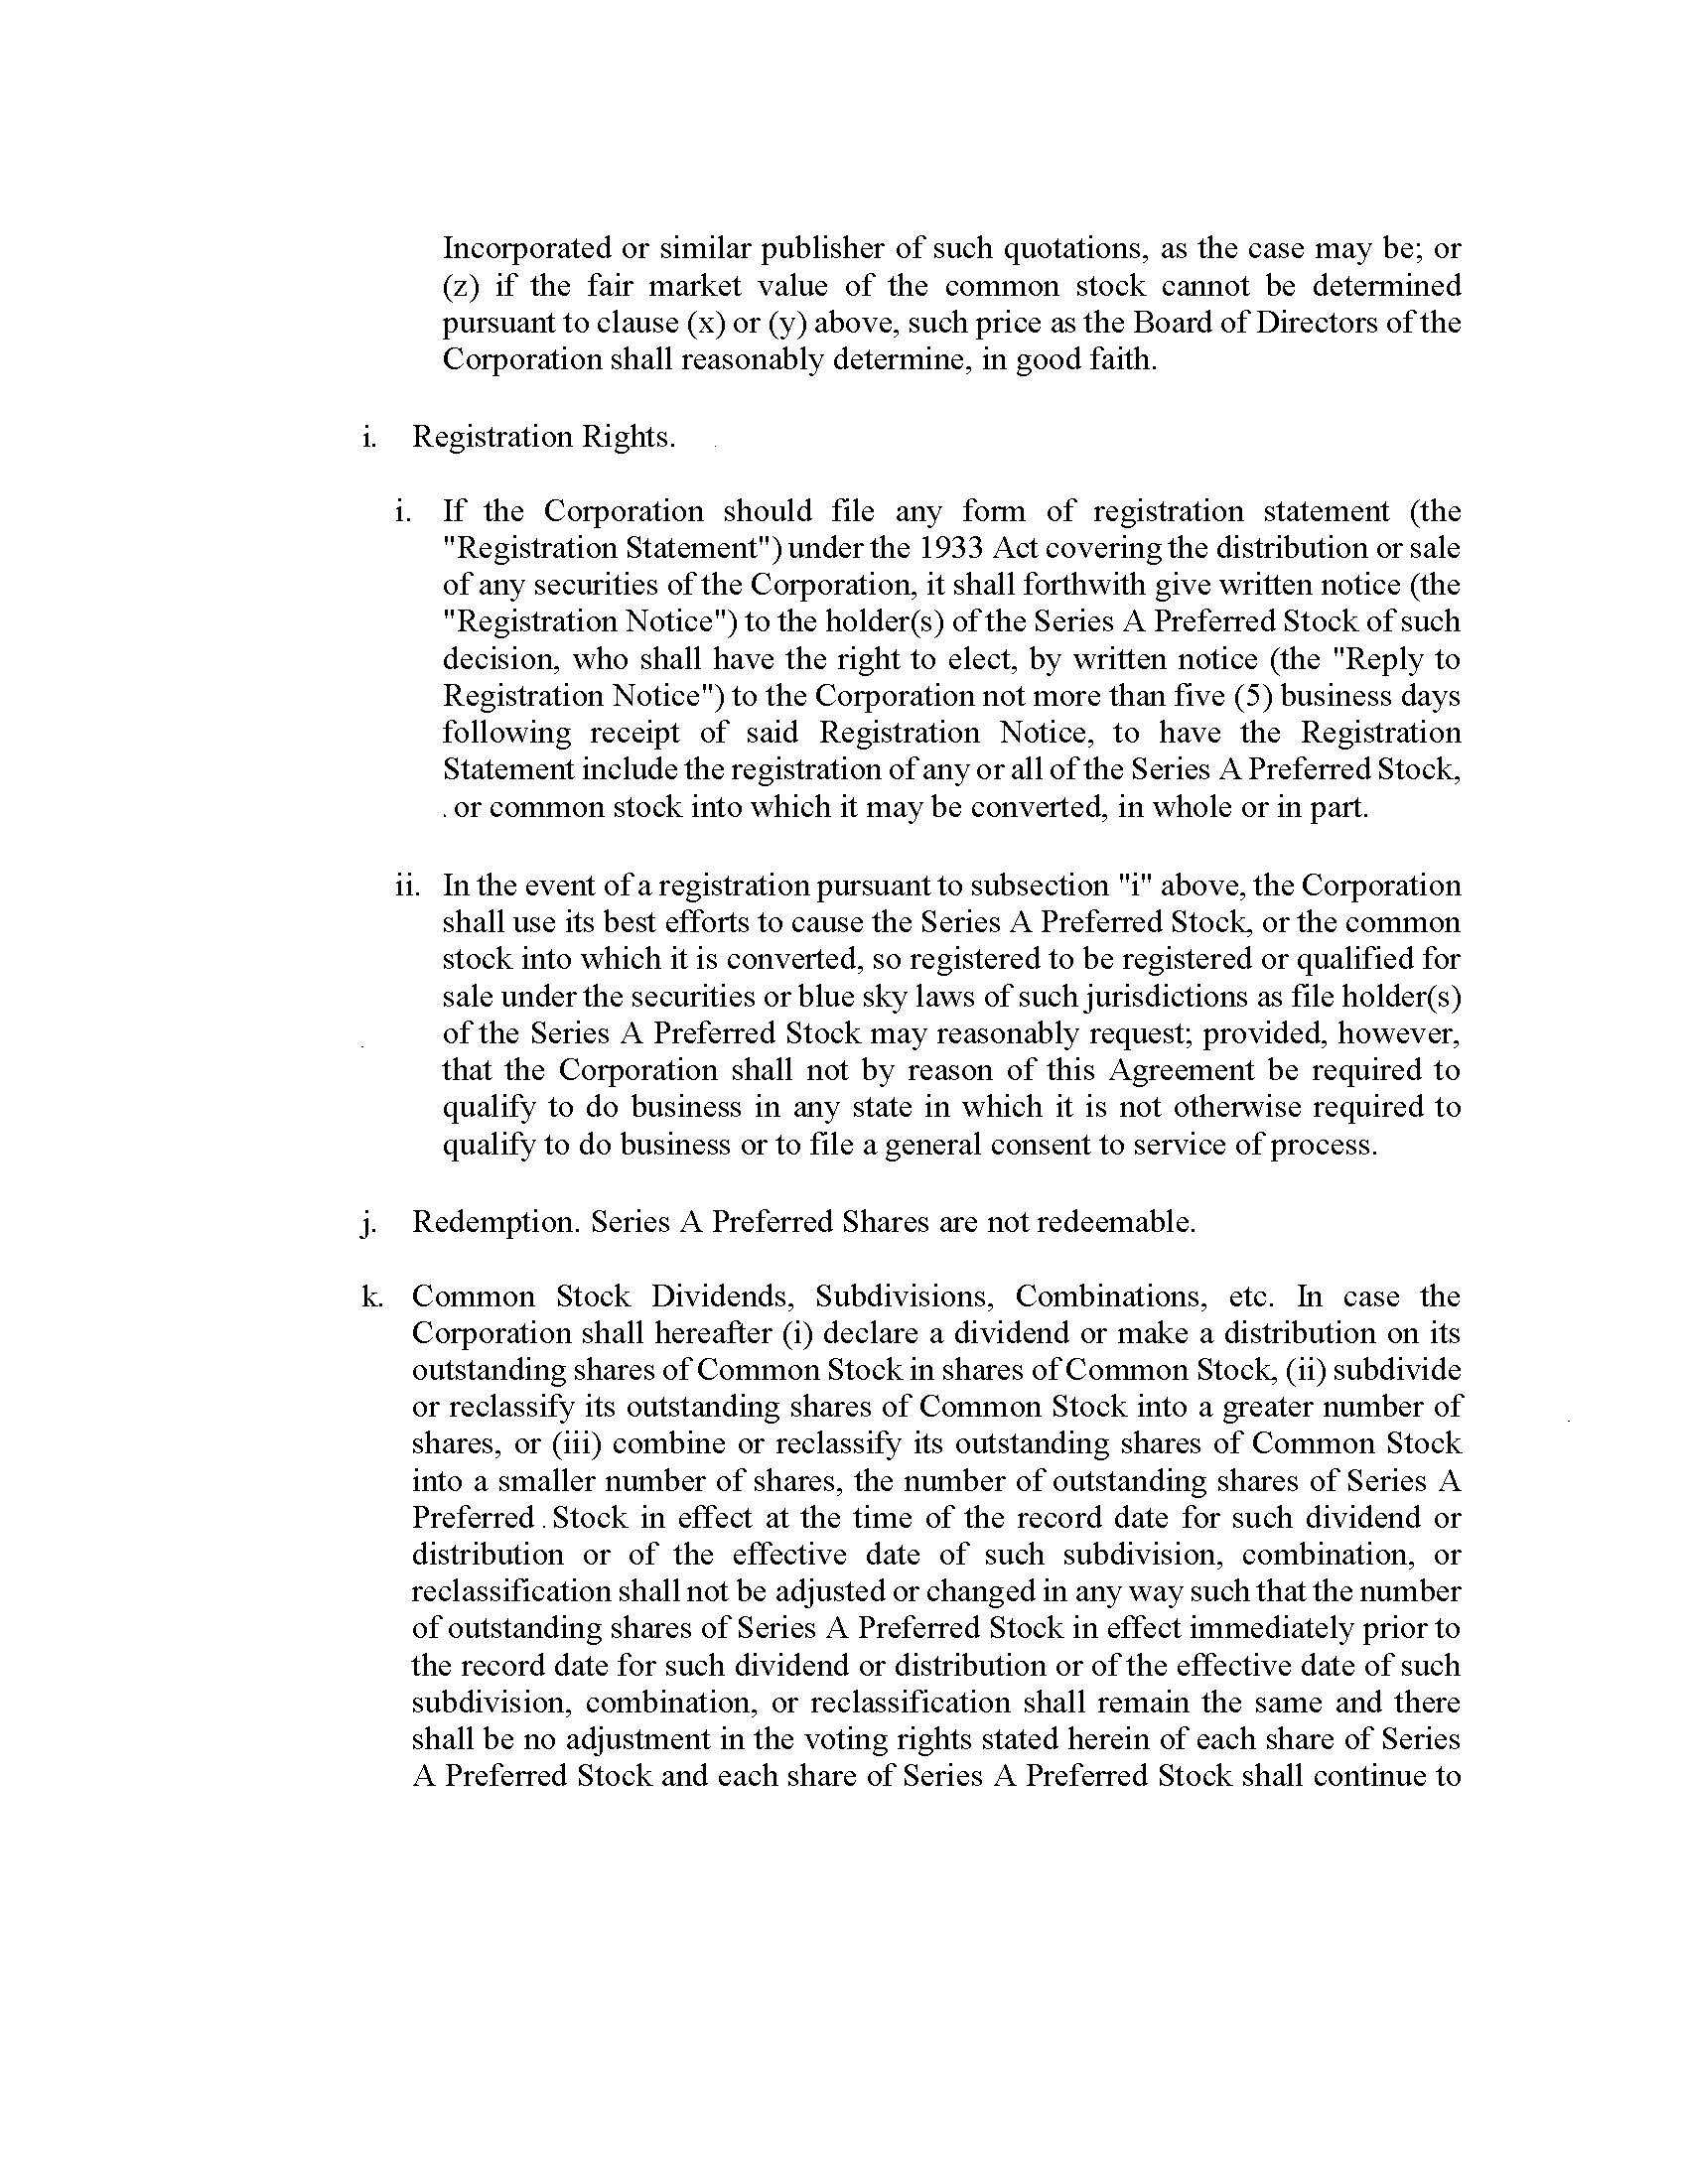 Cocannco Amended Art and Restated By-Laws 9-12_Page_08.jpg